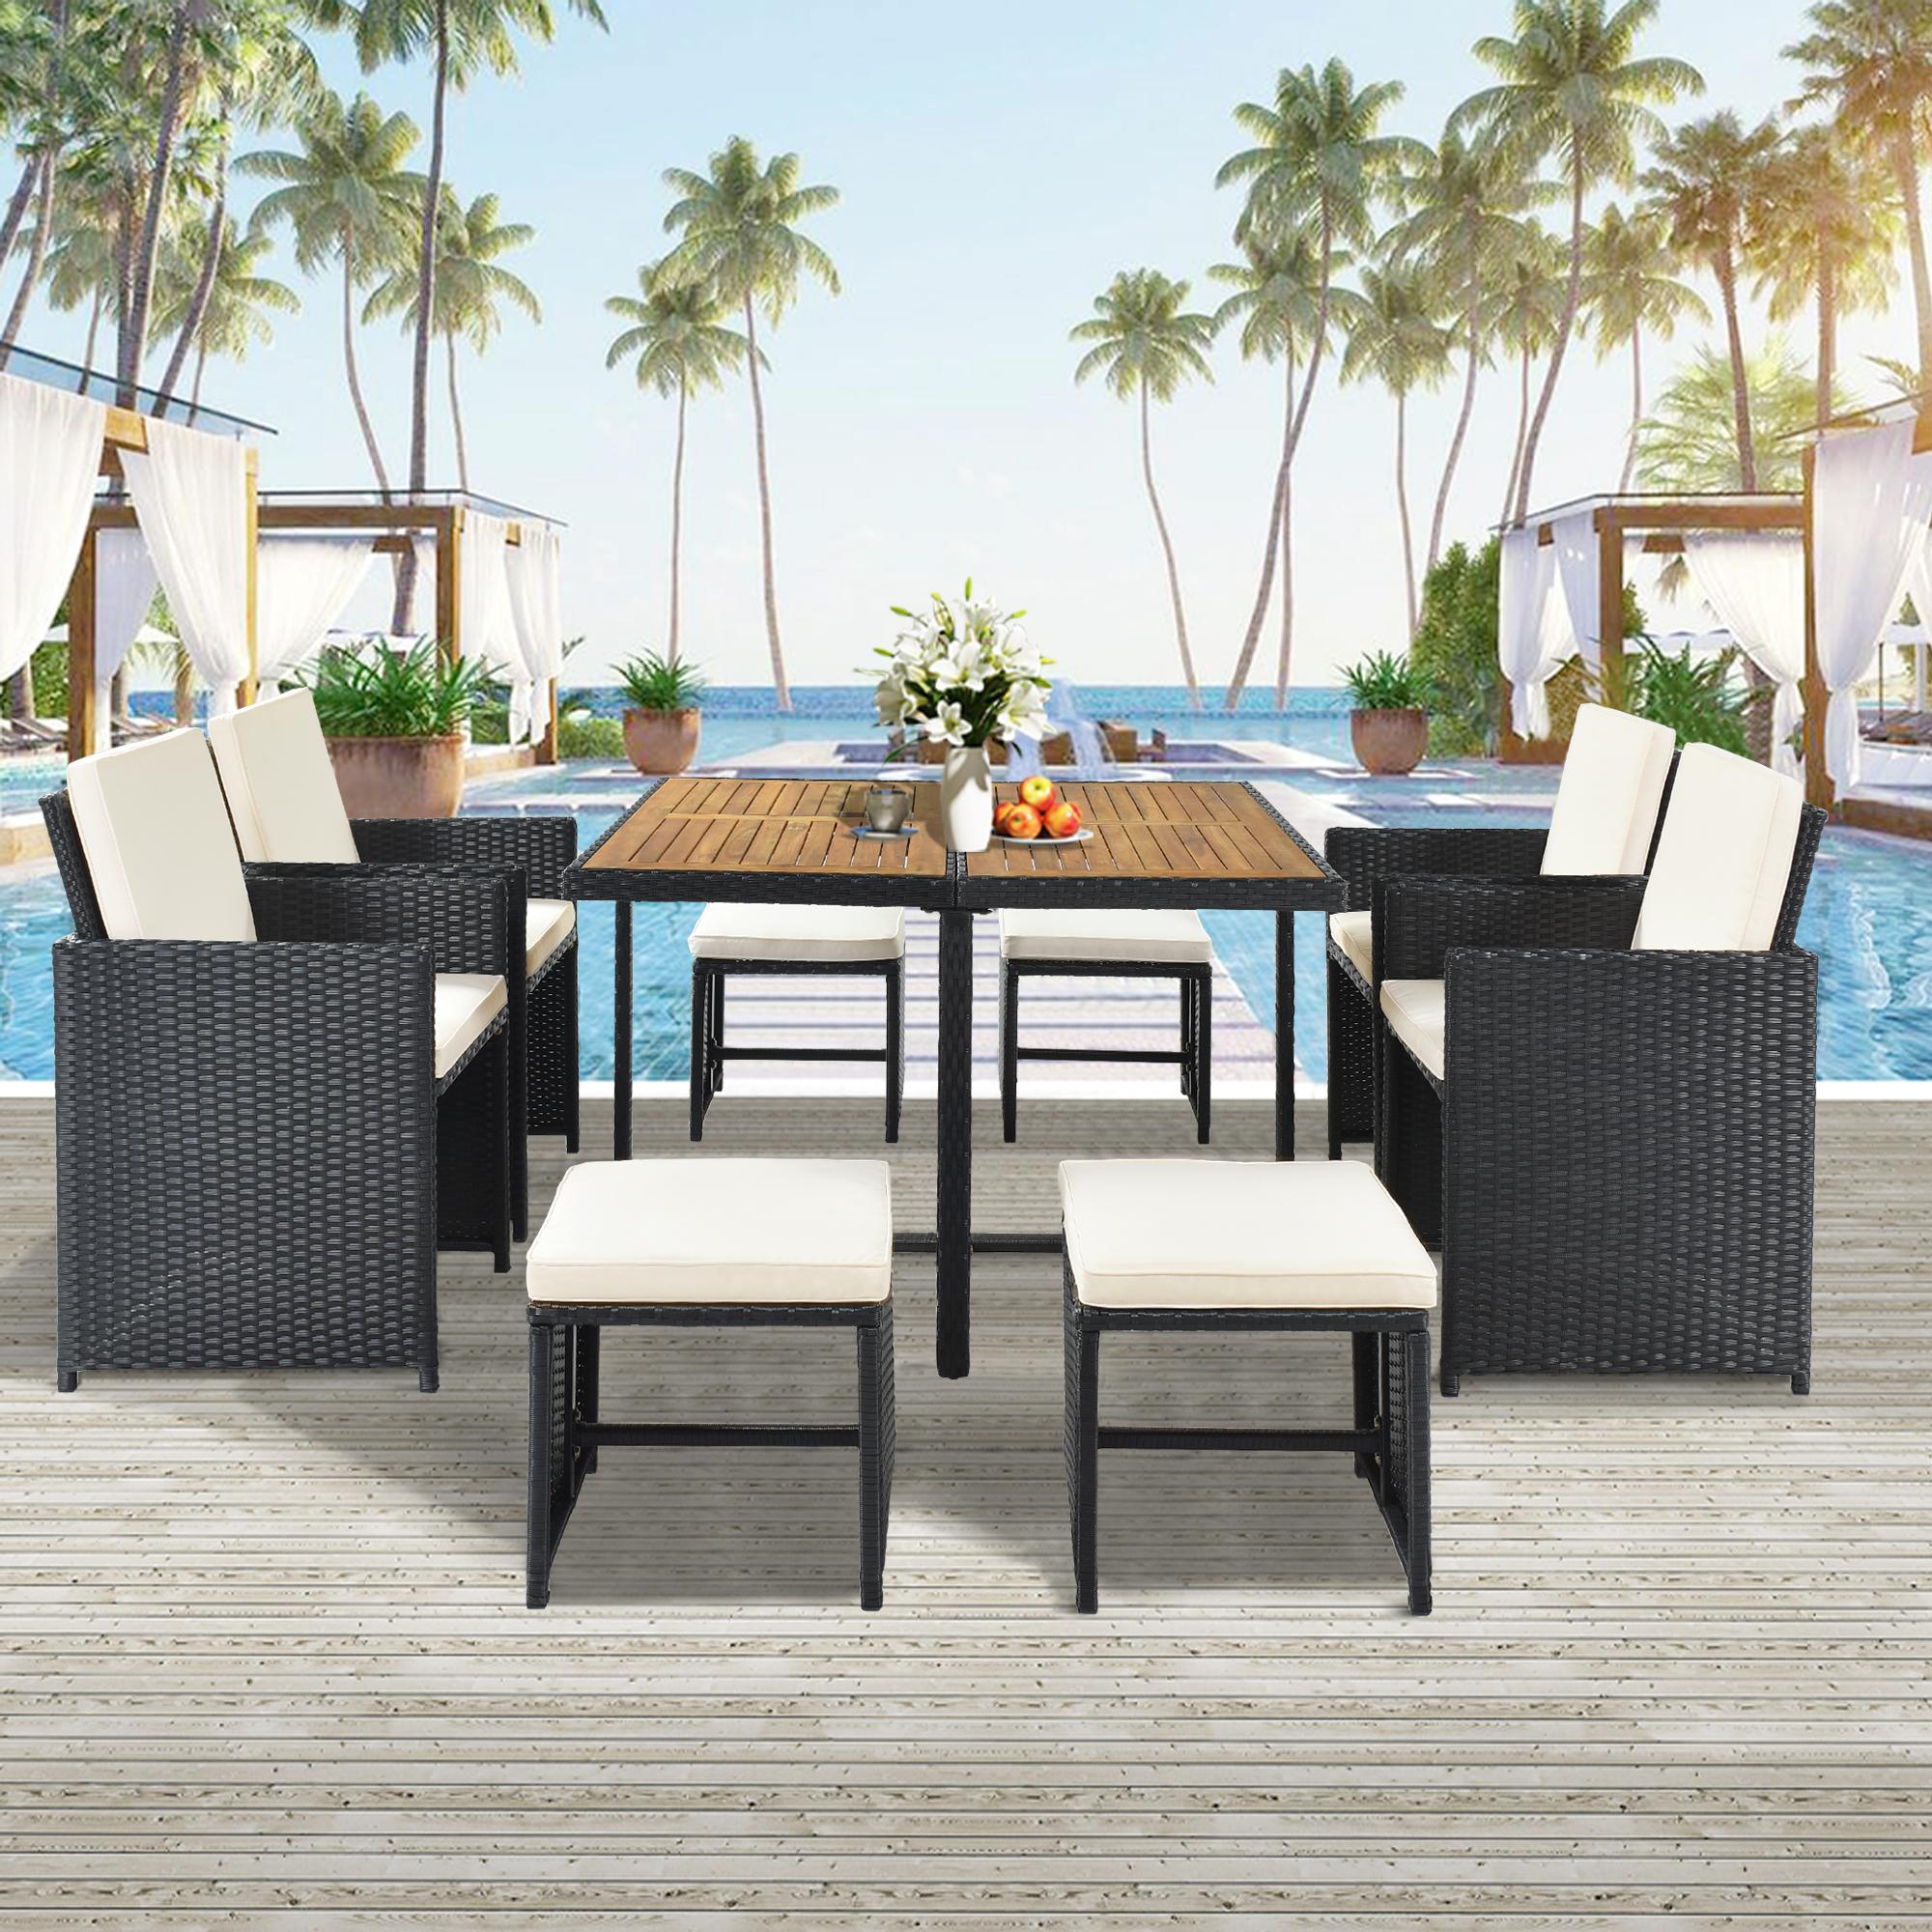 SYNGAR 9 Piece Wicker Outdoor Dining Set, Patio Table and Chairs Set for 8, Yard Conversation Sofa Set with Wood Tabletop & Ottomans, All Weather Sectional Furniture Set for Garden, Deck, Pool, D8258 - image 2 of 10